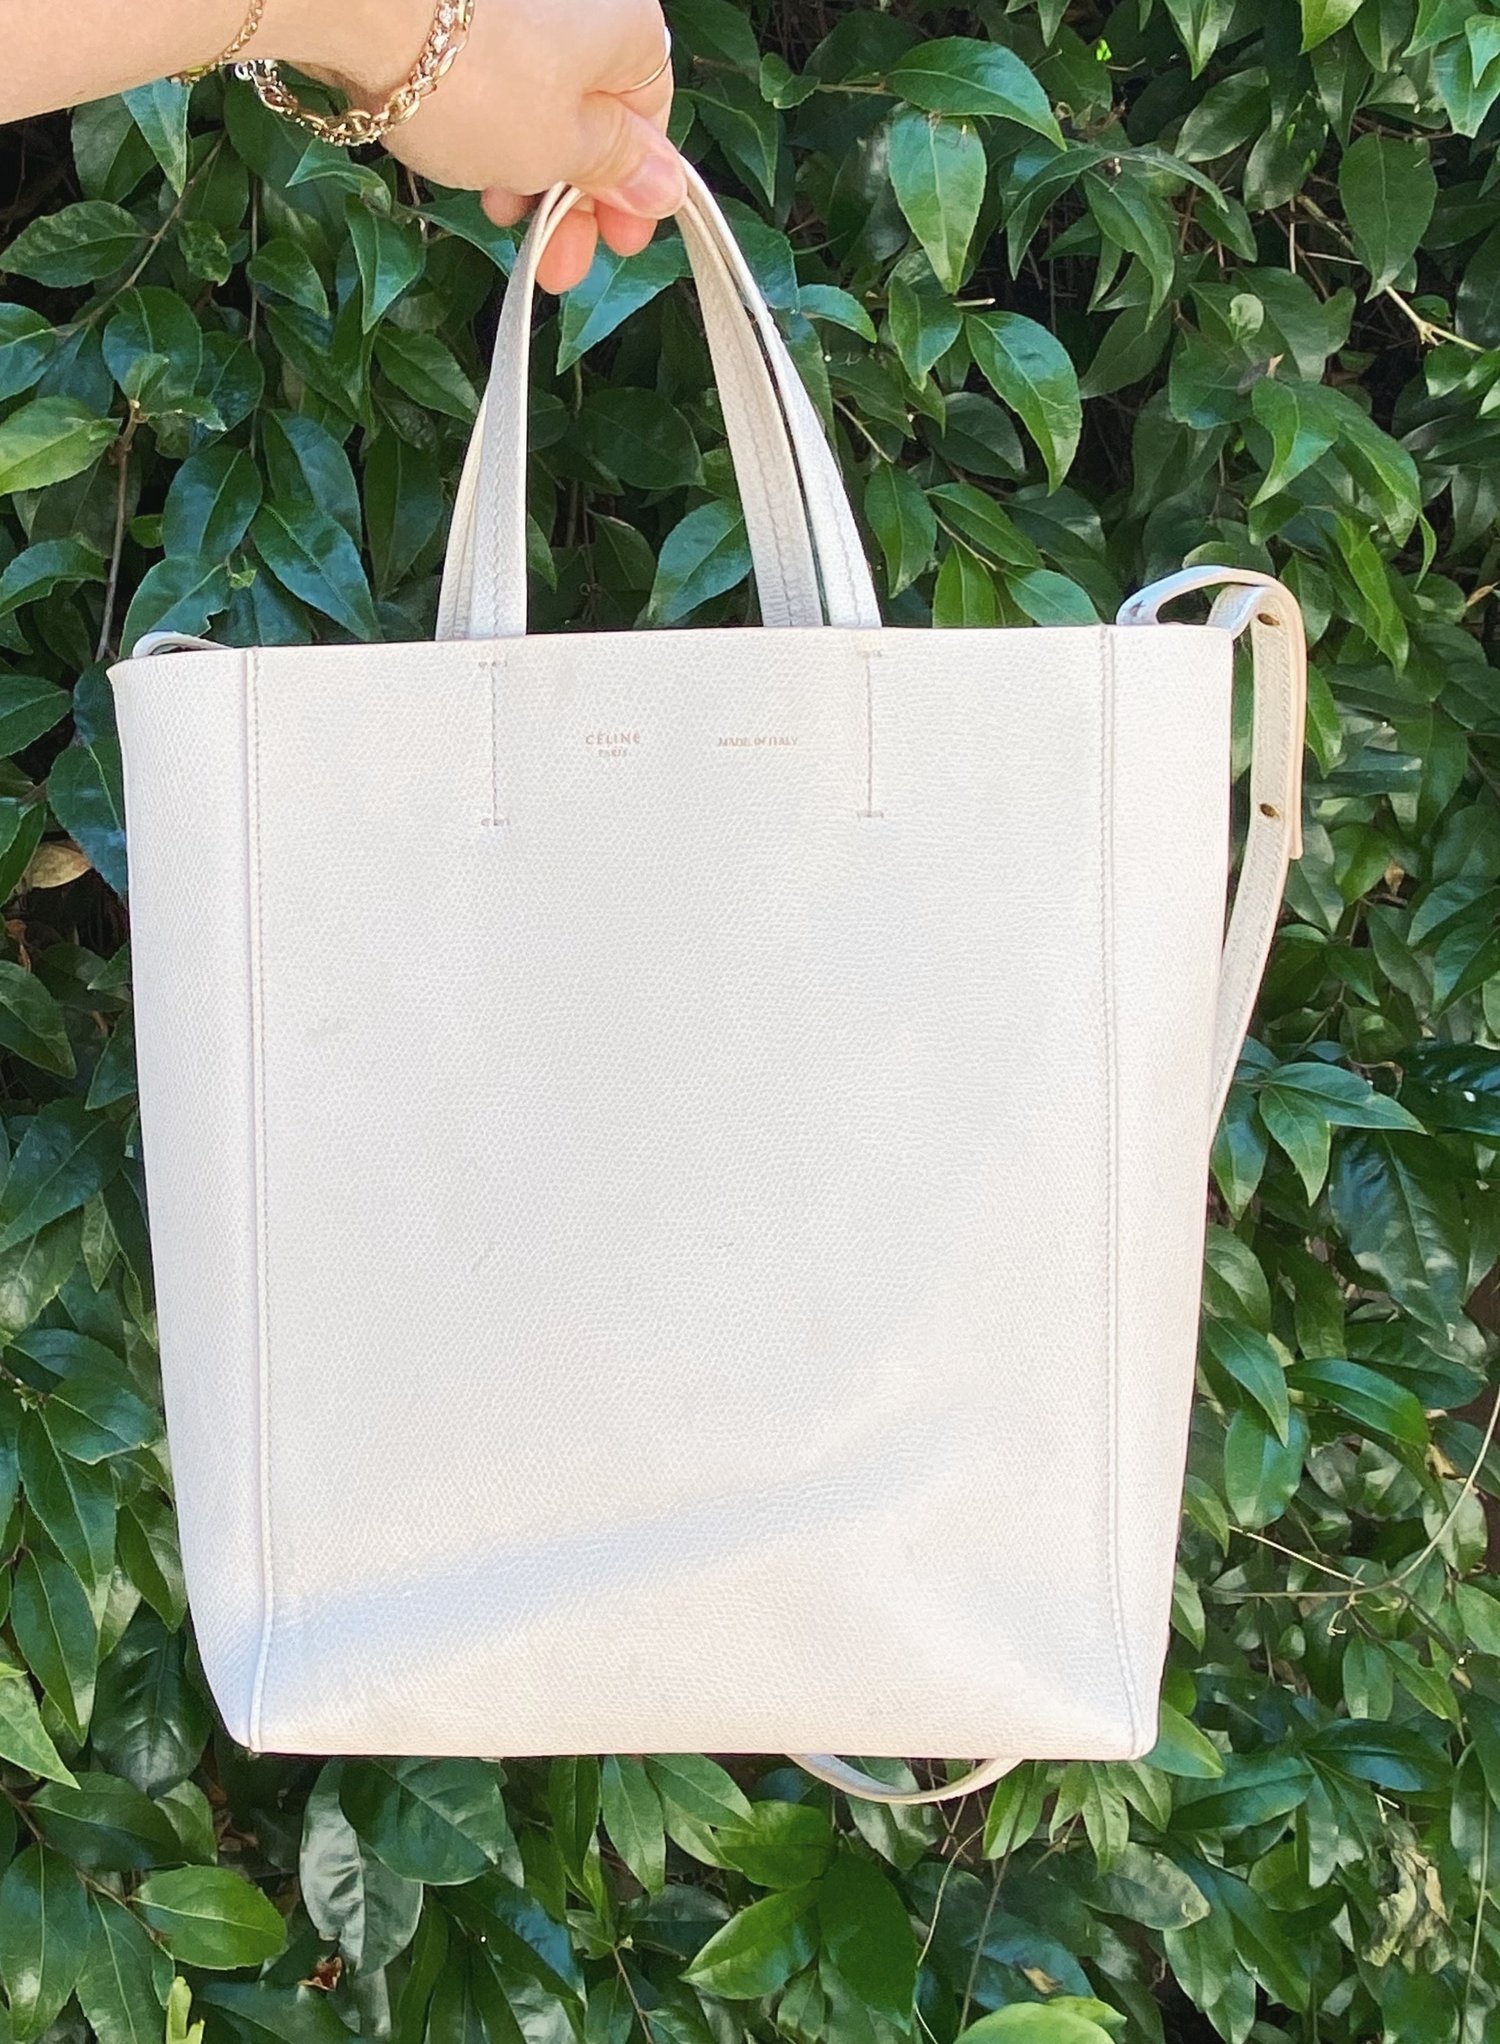 Quince Leather Bags Review {Updated August 2023} — Fairly Curated